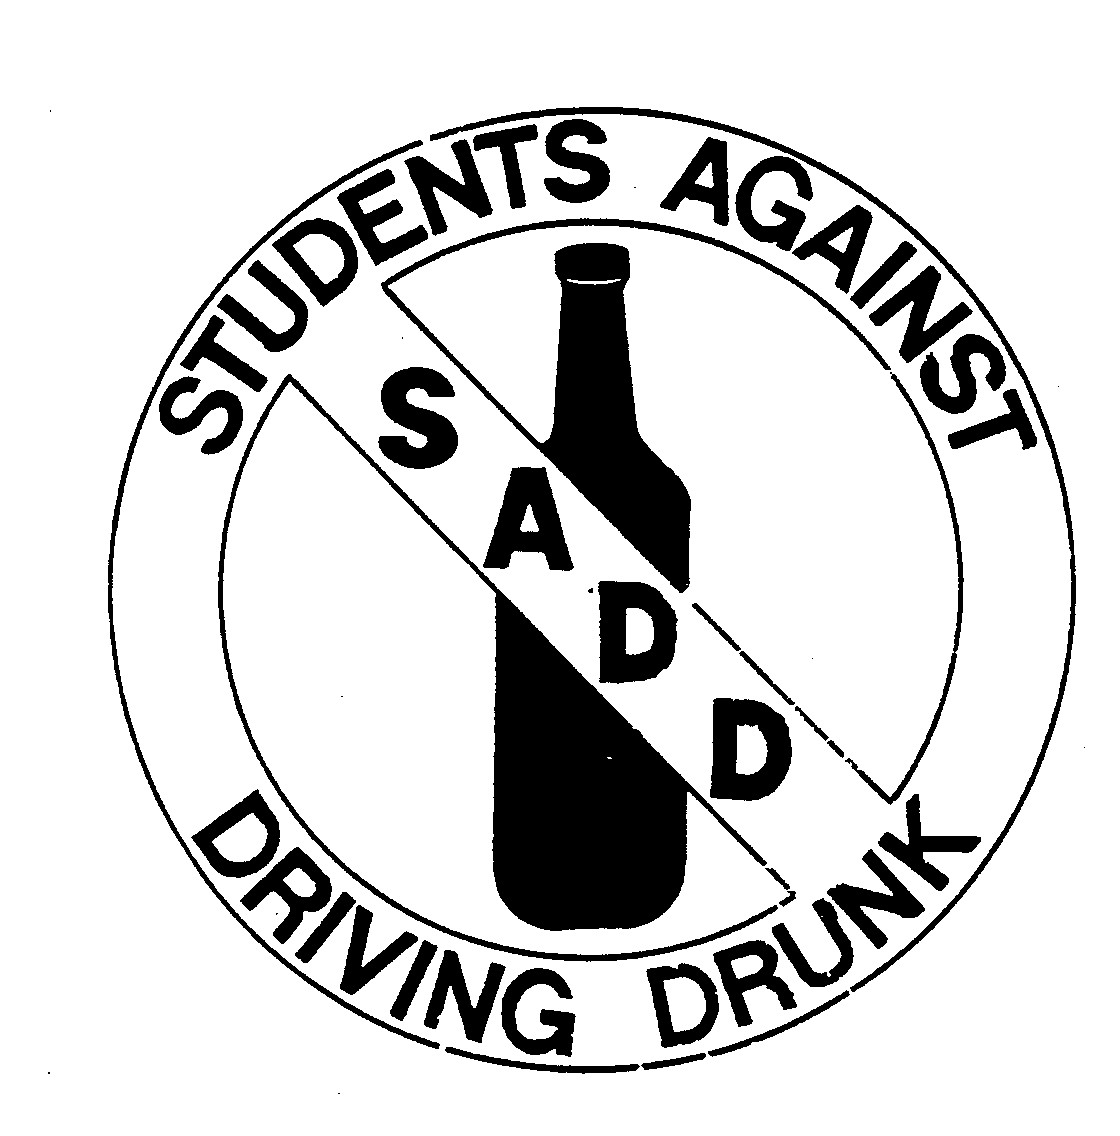 SADD STUDENTS AGAINST DRIVING DRUNK